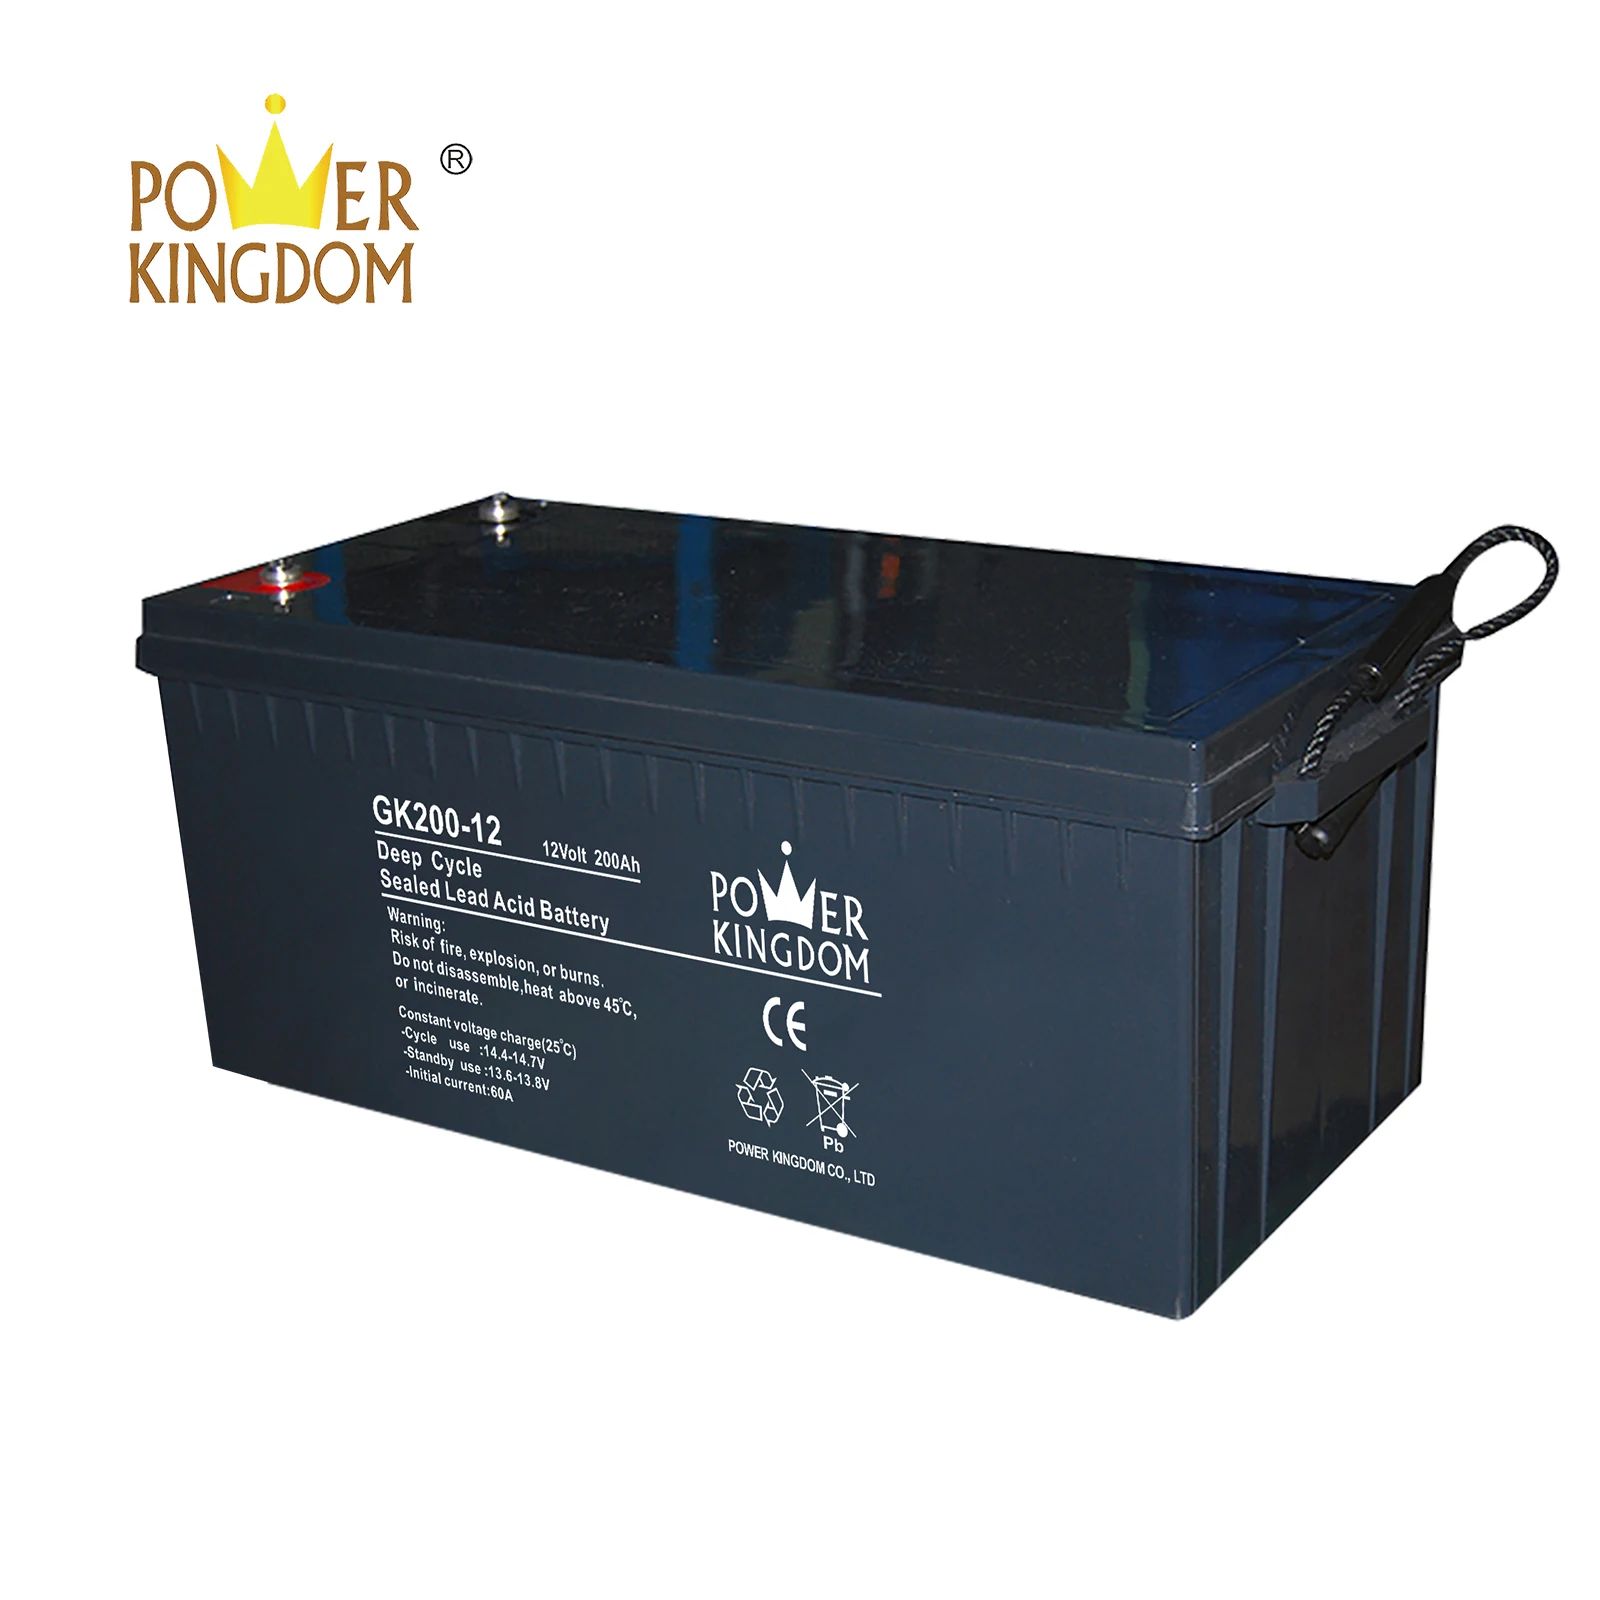 long standby life rechargeable sealed lead acid battery with good price medical equipment